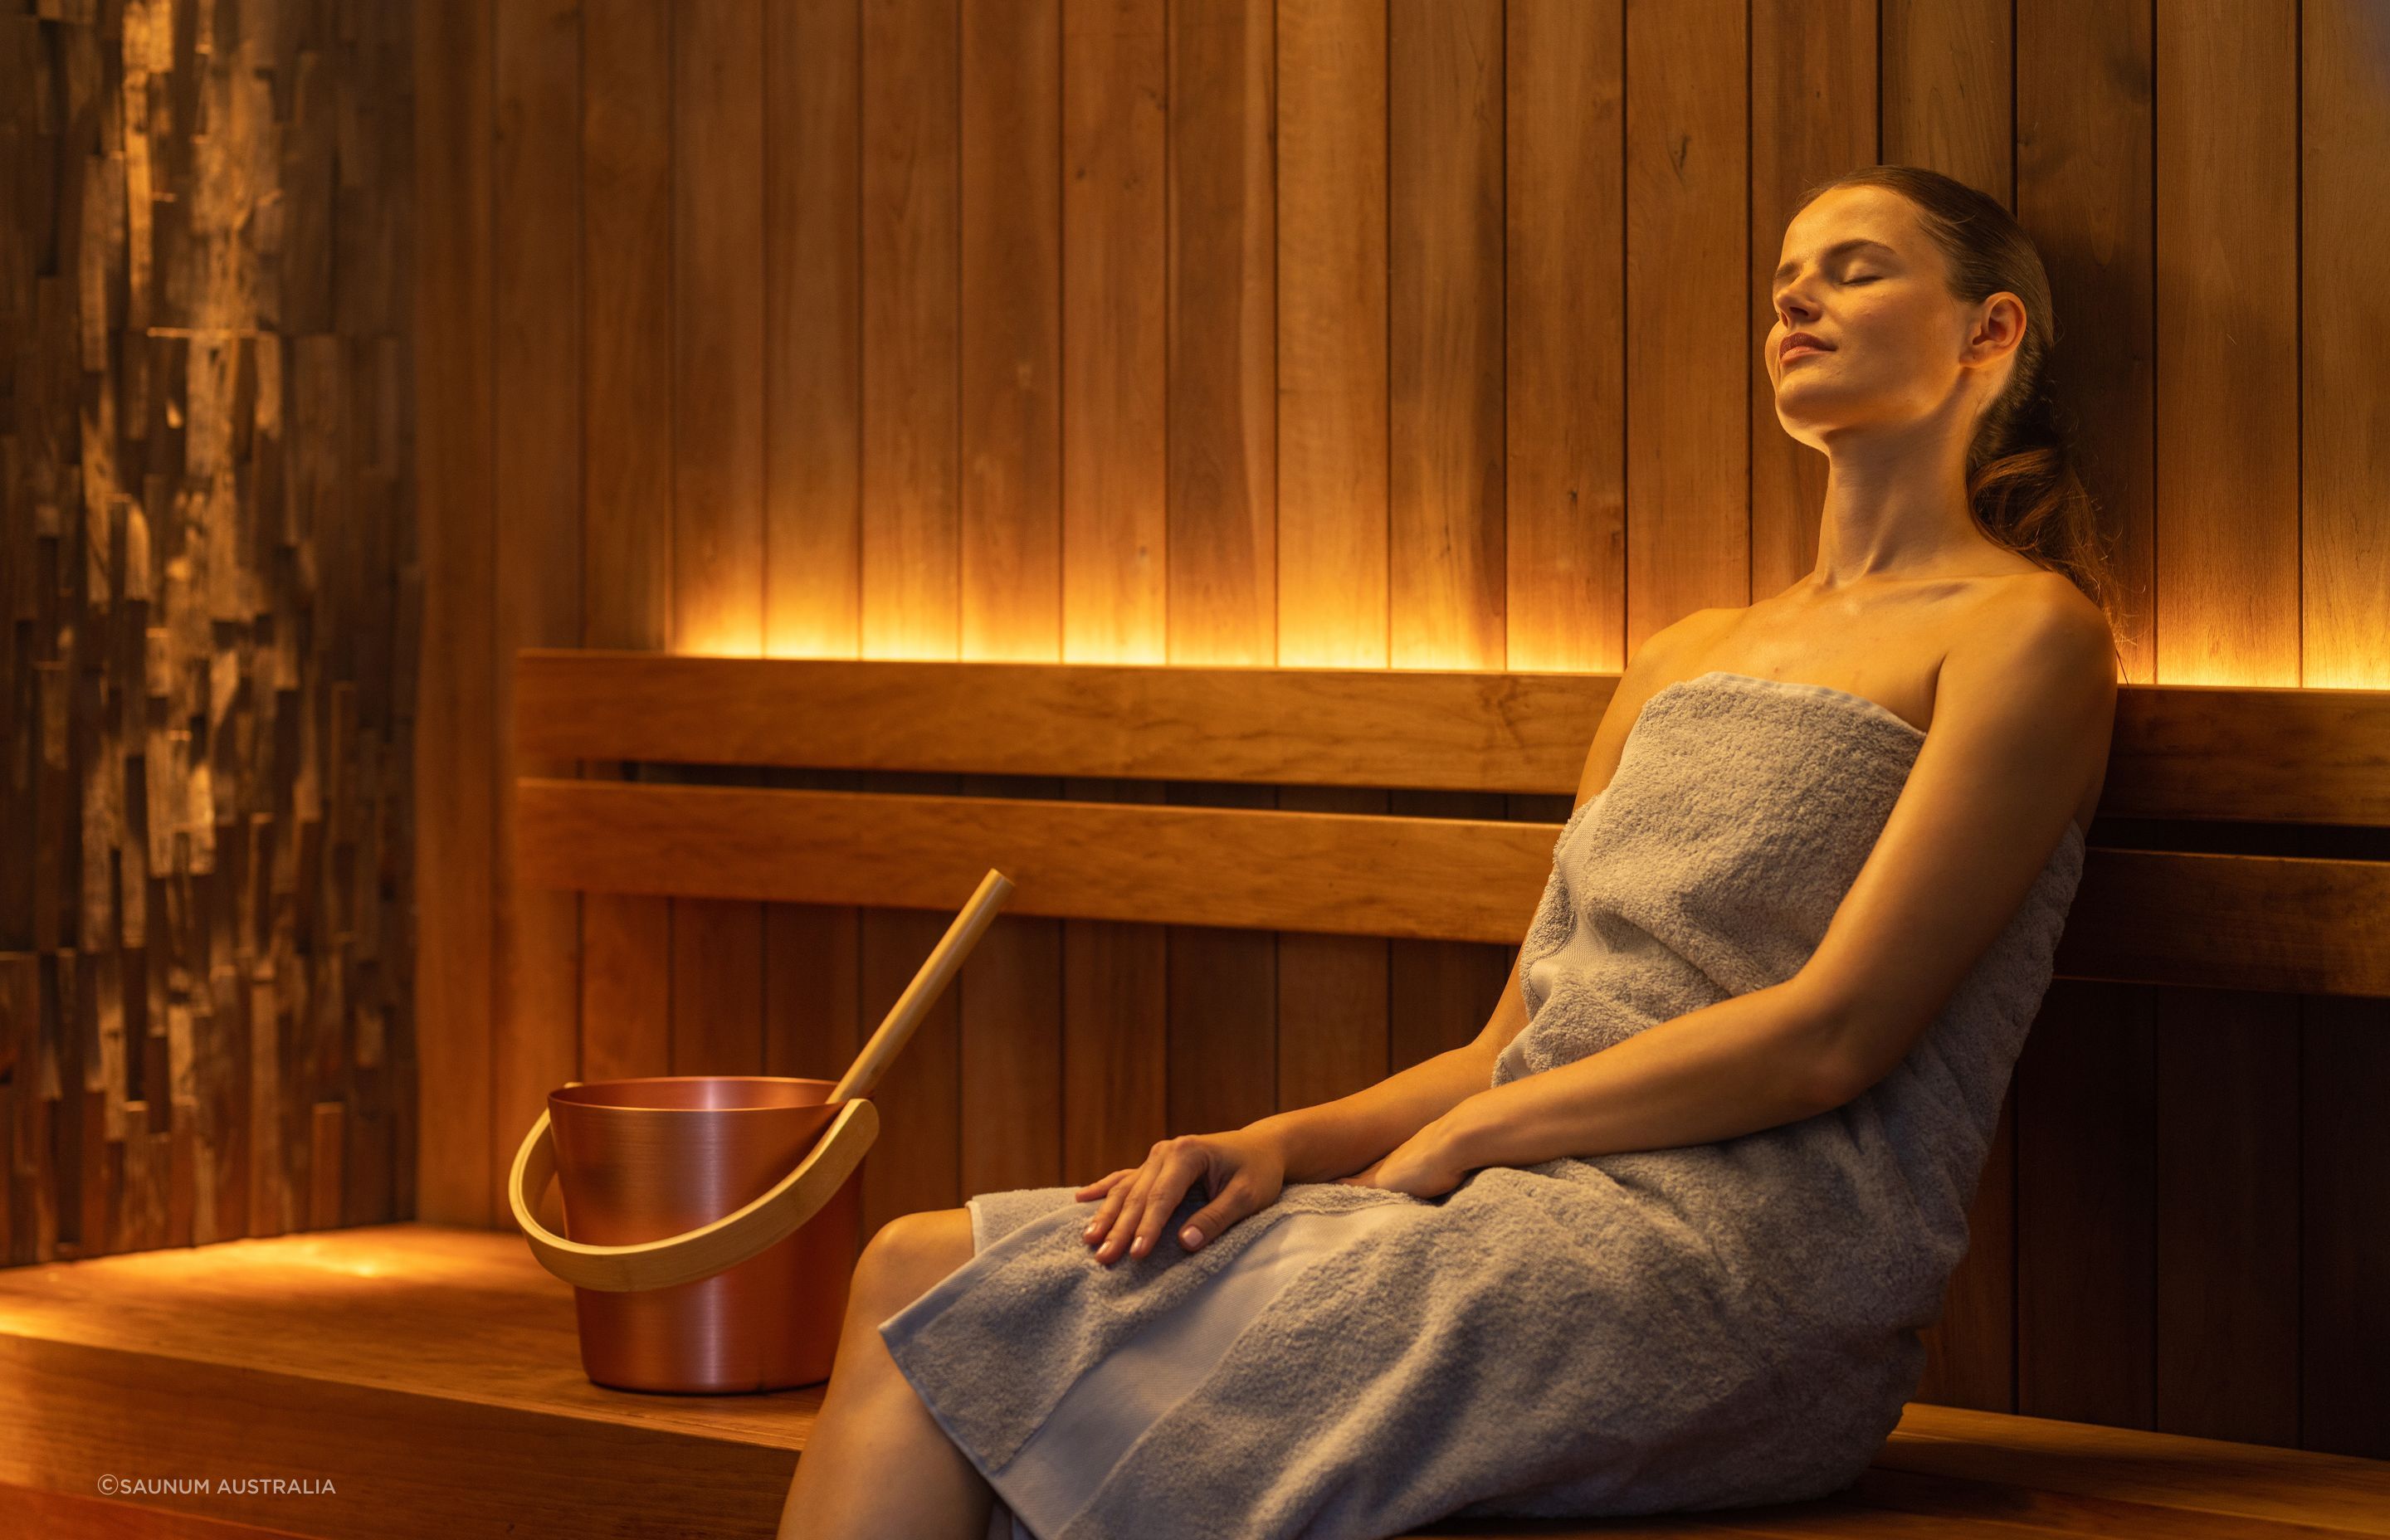 Alongside heart health benefits, sauna therapy offers other health benefits, including improved circulation, muscle relaxation, detoxification, stress reduction, enhanced immune system function, better sleep, and improved skin health. 